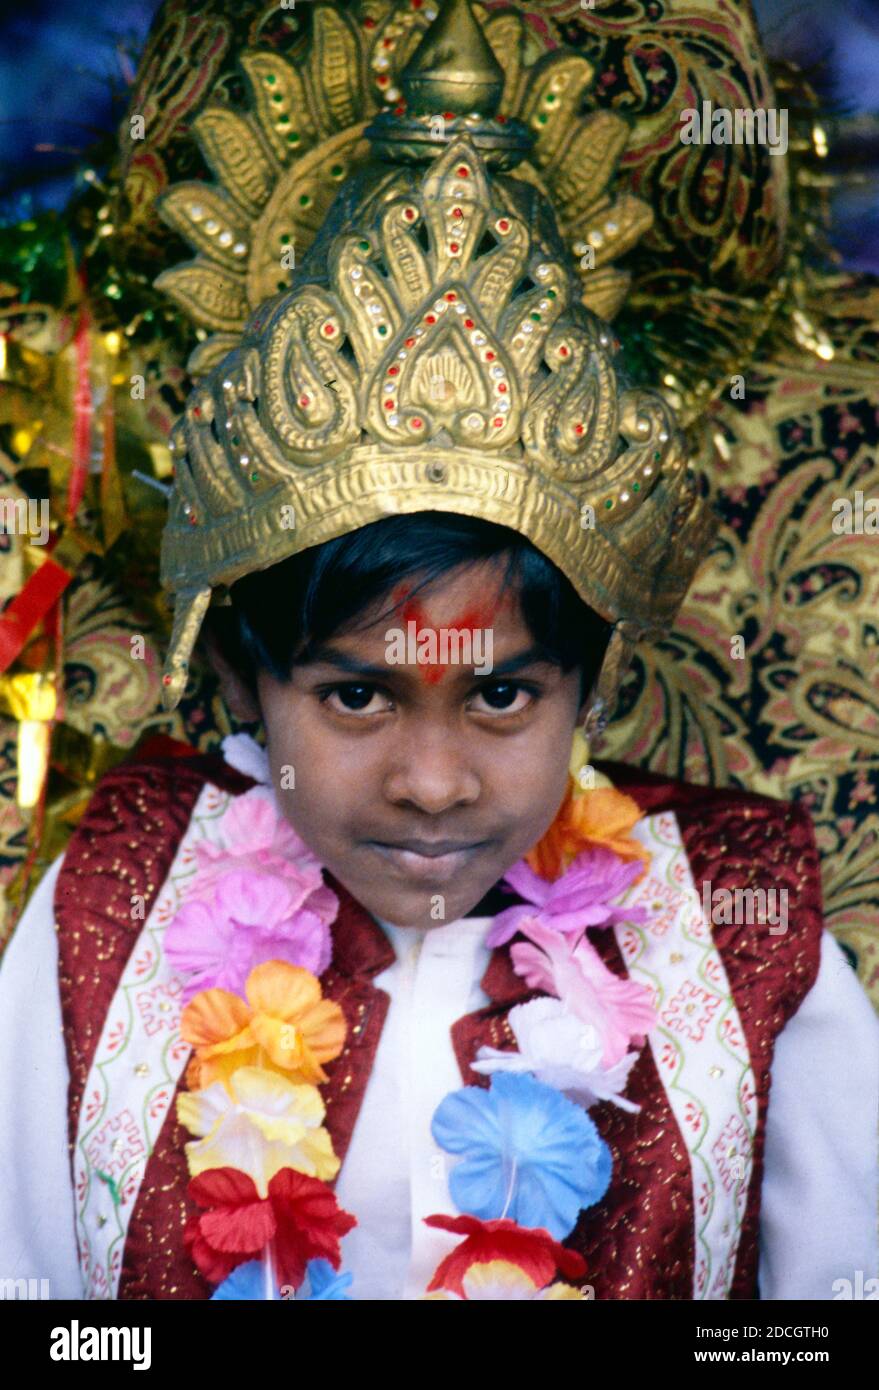 Portrait of Young Indian Boy or Hindu Boy Dressed as a Prince & Draped with Floral Garlands for Diwali, or the Indian Festival of Lights, in Reunion Island France Stock Photo